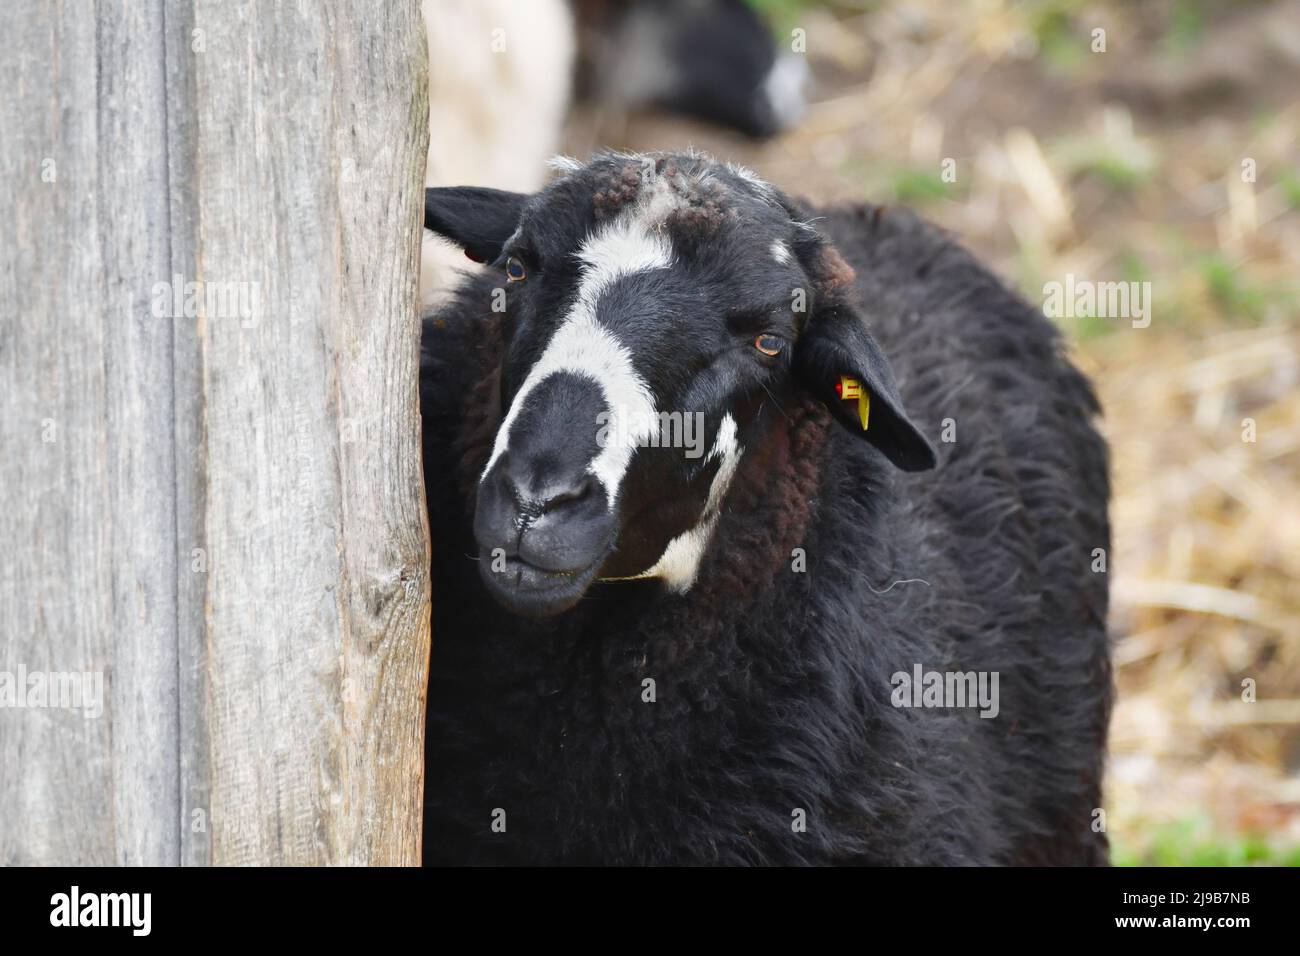 Portrait of a cute black sheep with white markings looking around the corner of a wooden stable. Stock Photo